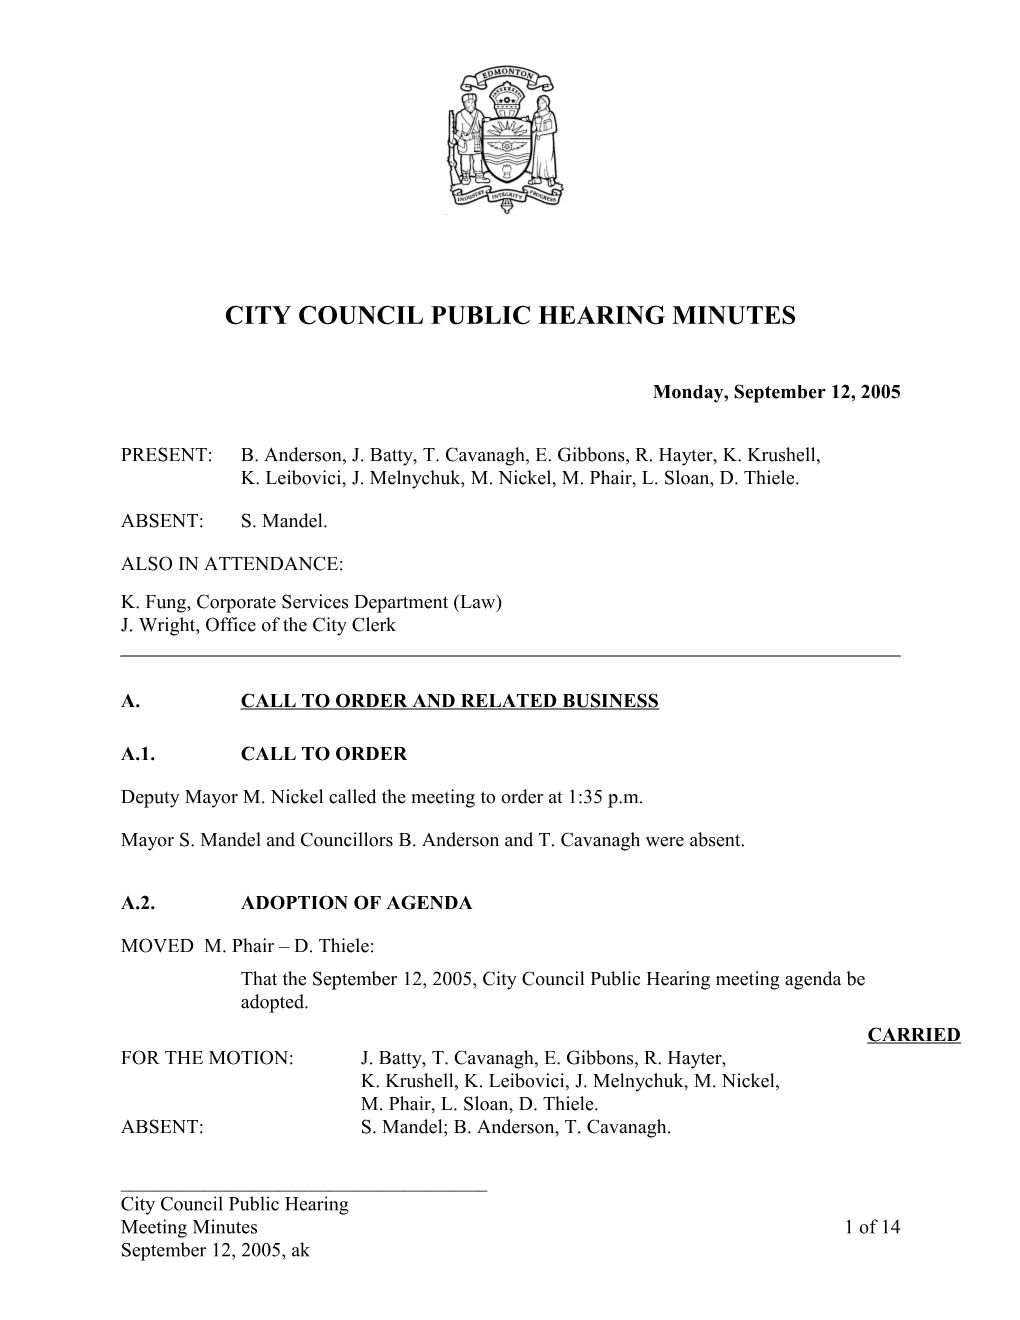 Minutes for City Council September 12, 2005 Meeting